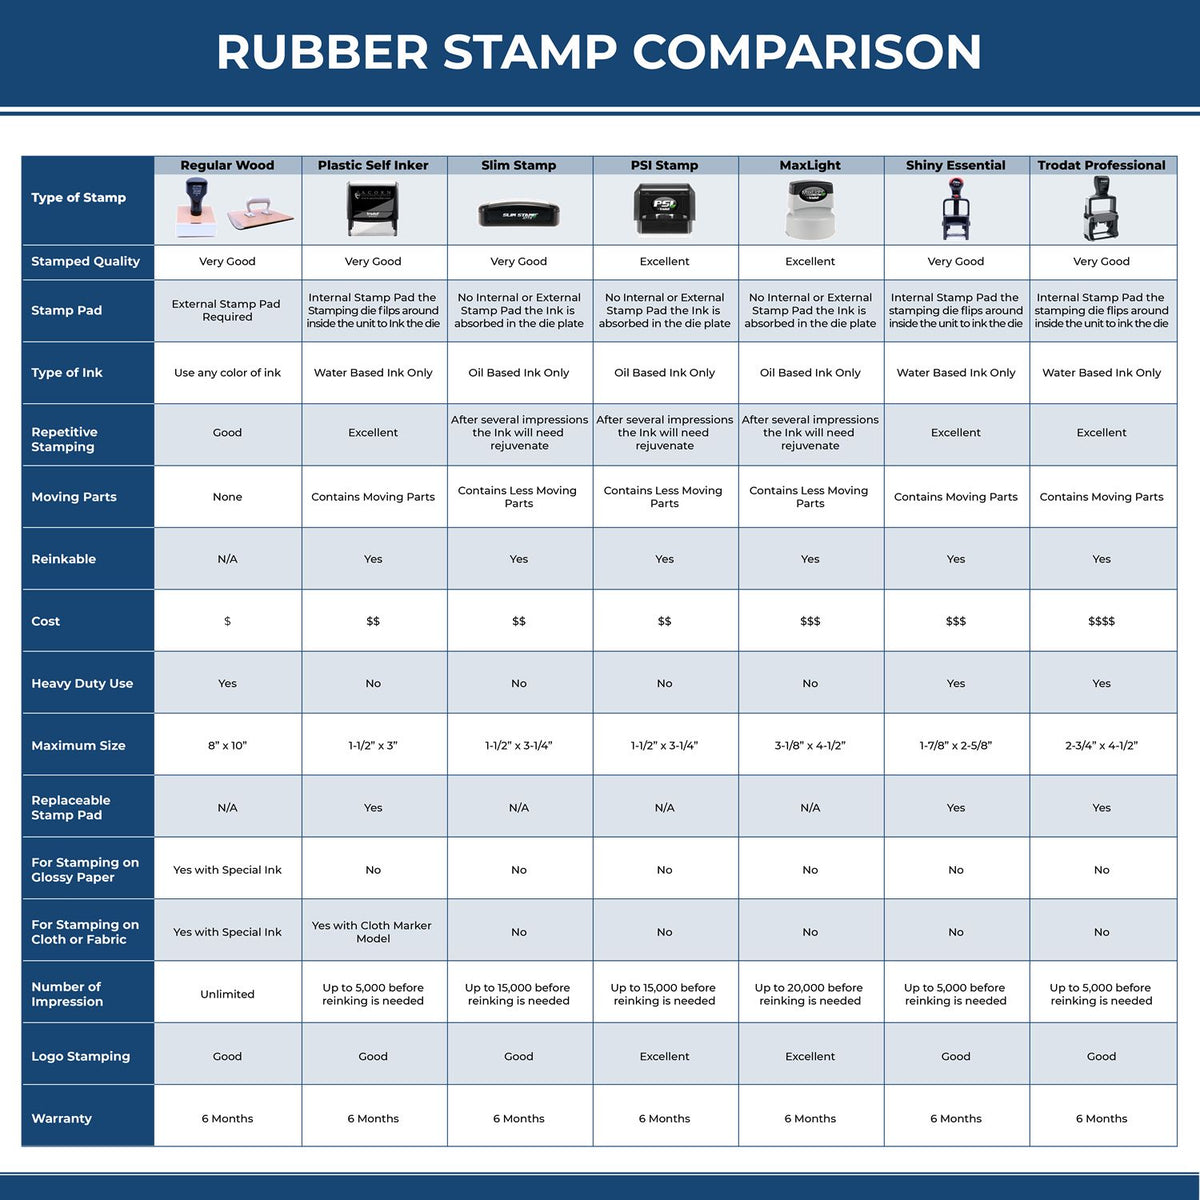 A comparison chart for the different types of mount models available for the Self-Inking Wisconsin PE Stamp.